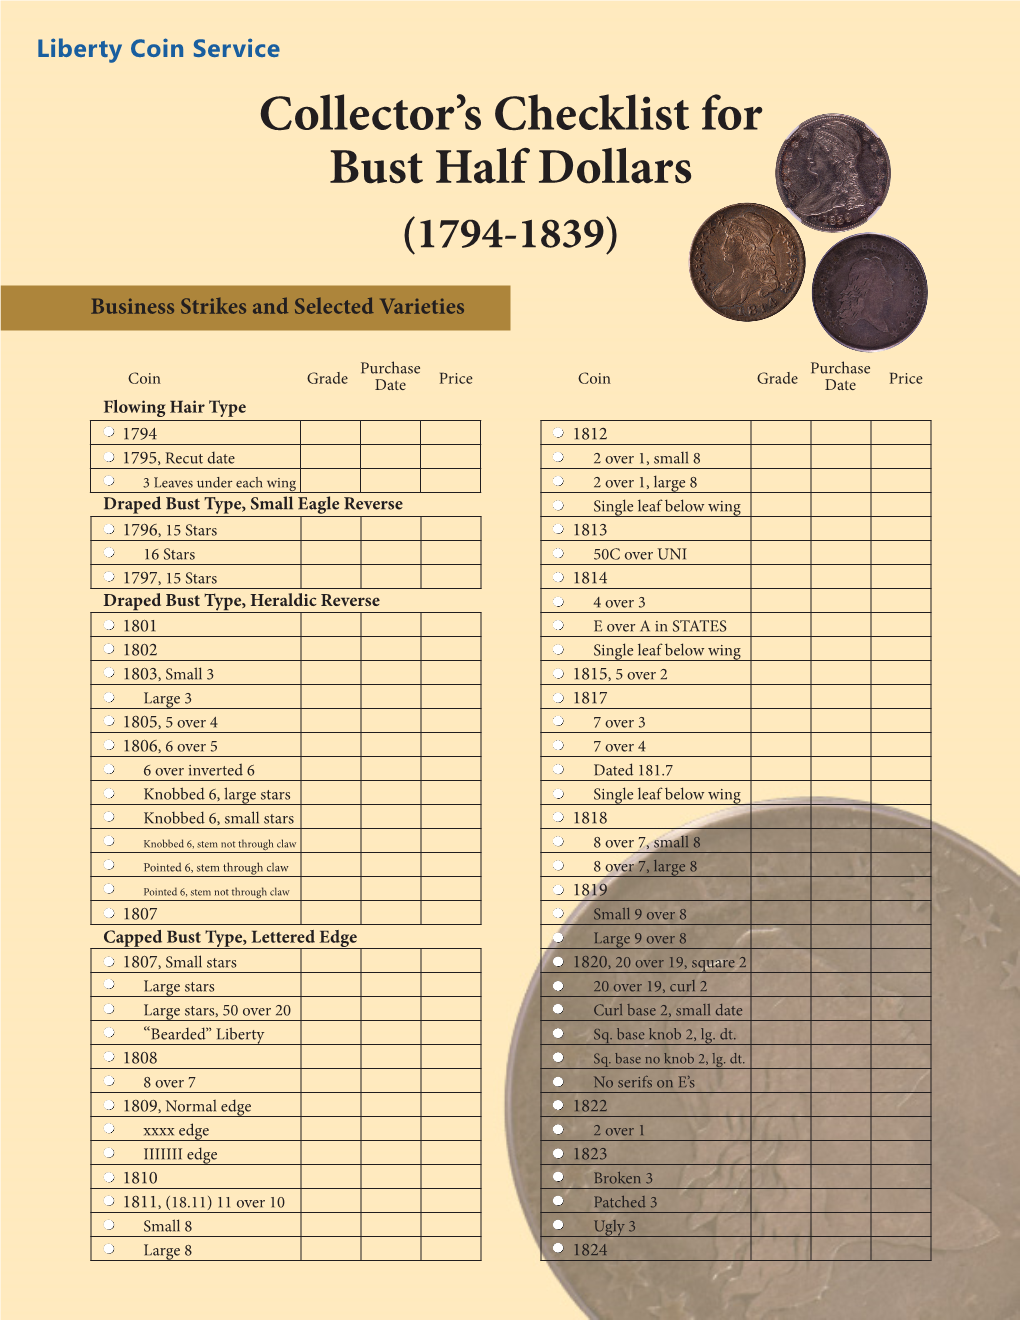 Collector's Checklist for Bust Half Dollars